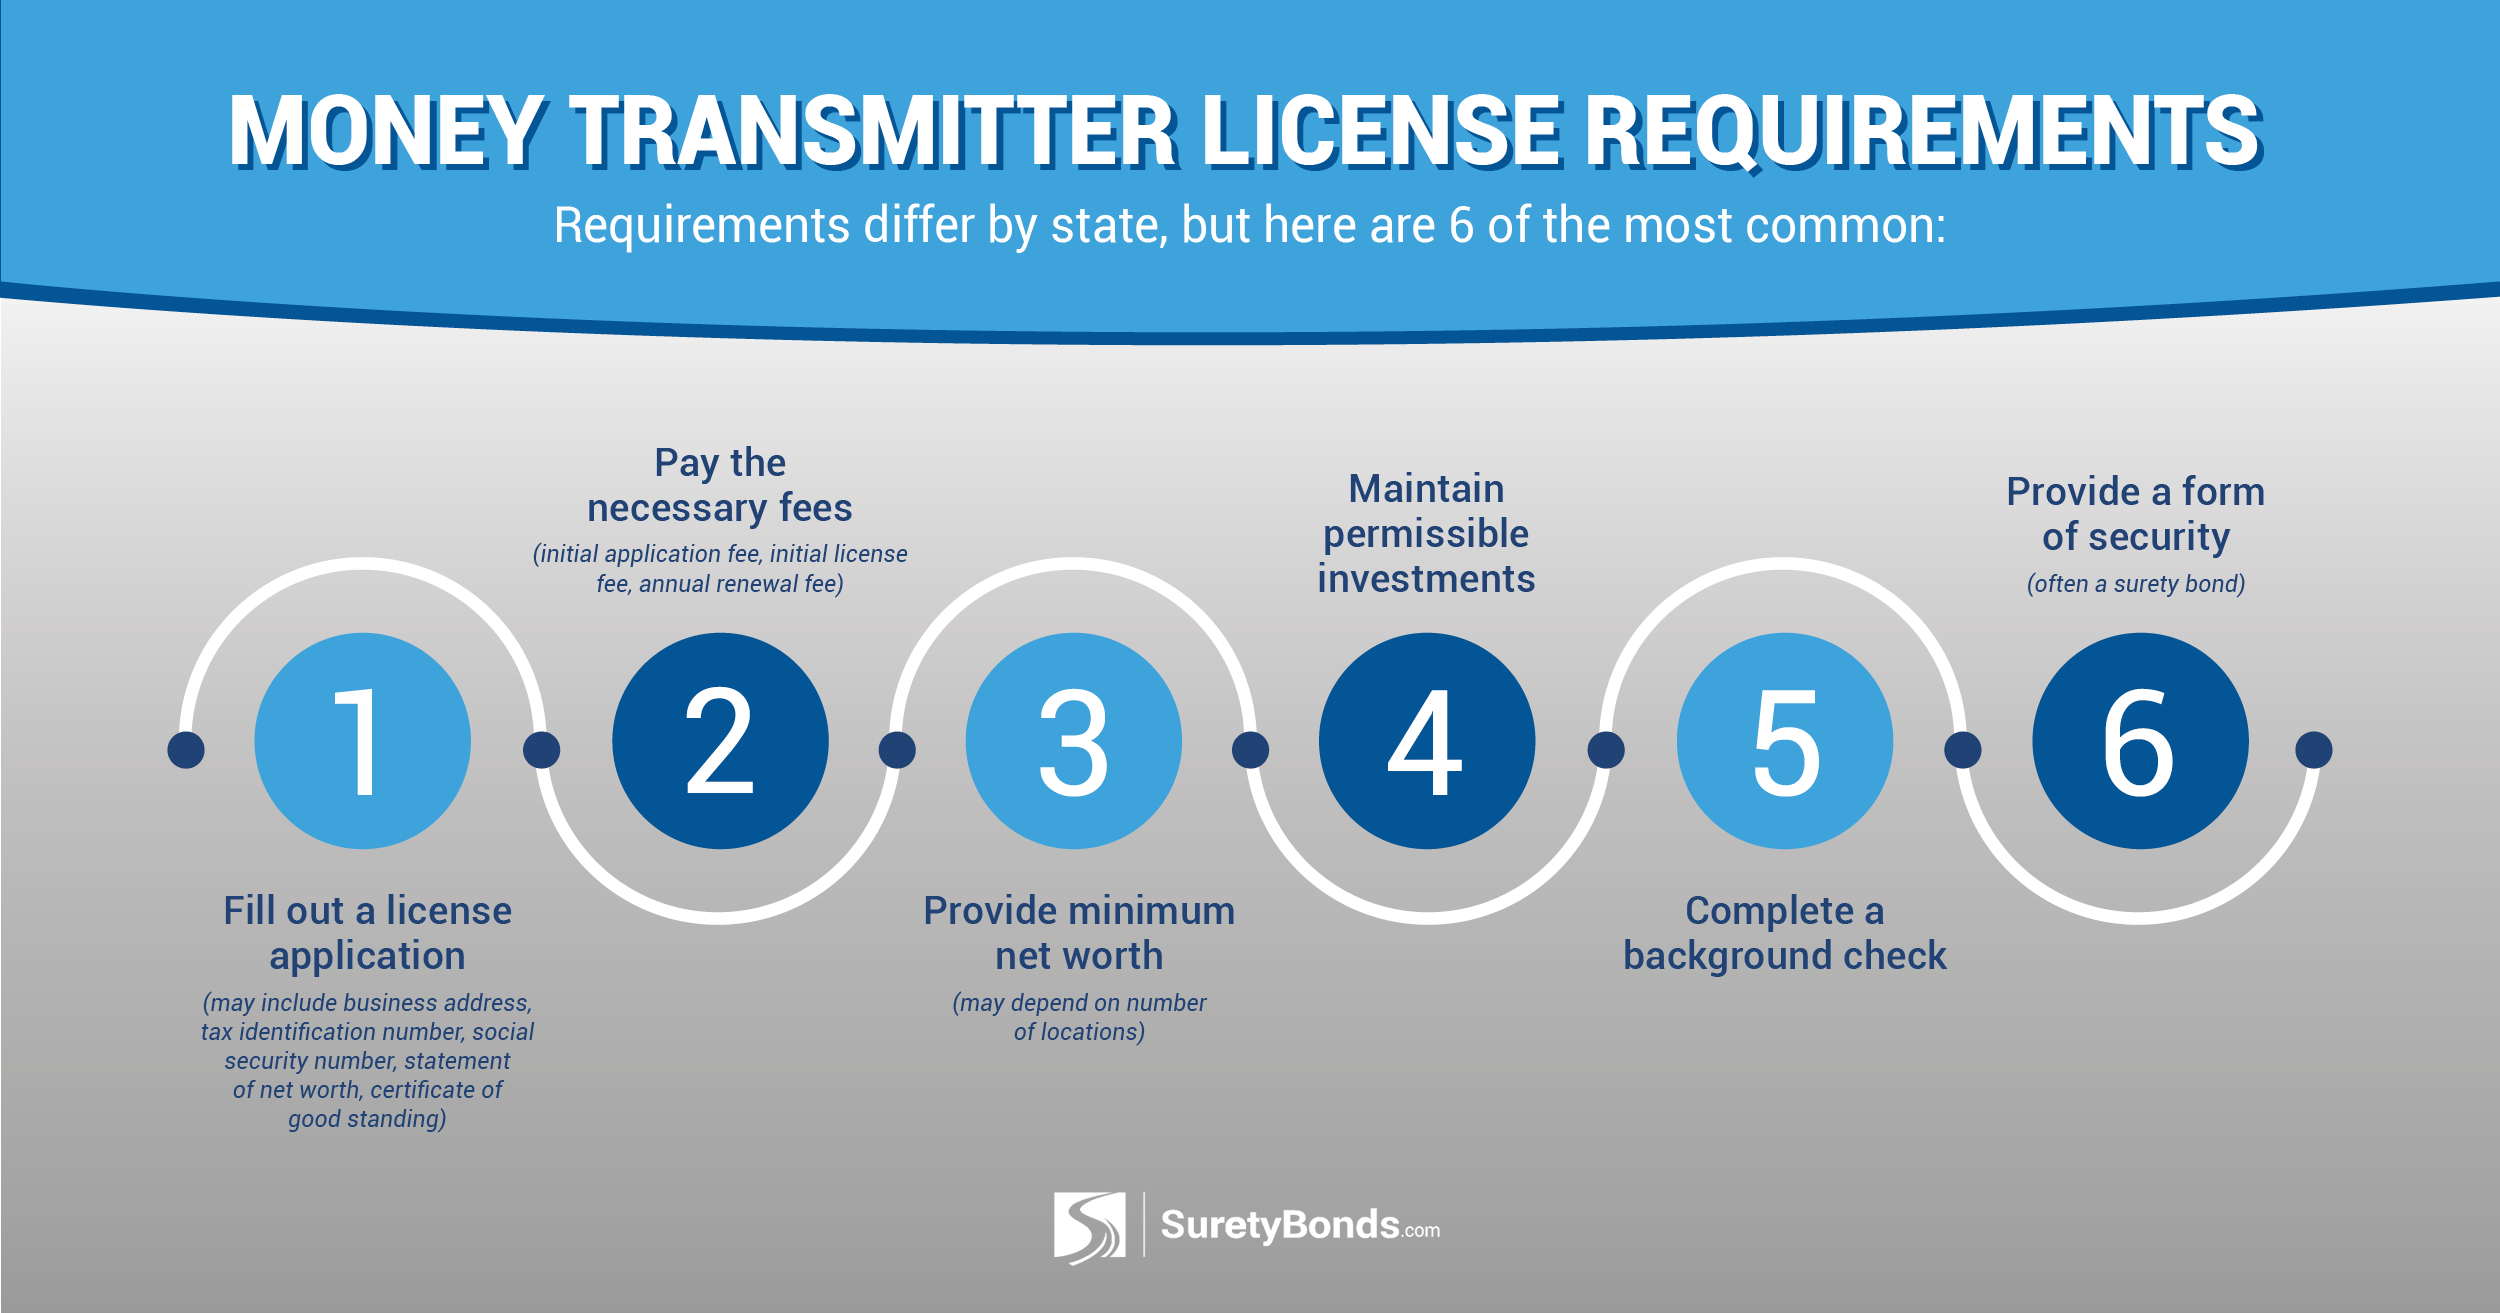 Obtain a money transmitter license by completing an application, paying the fee, and meeting all requirements.